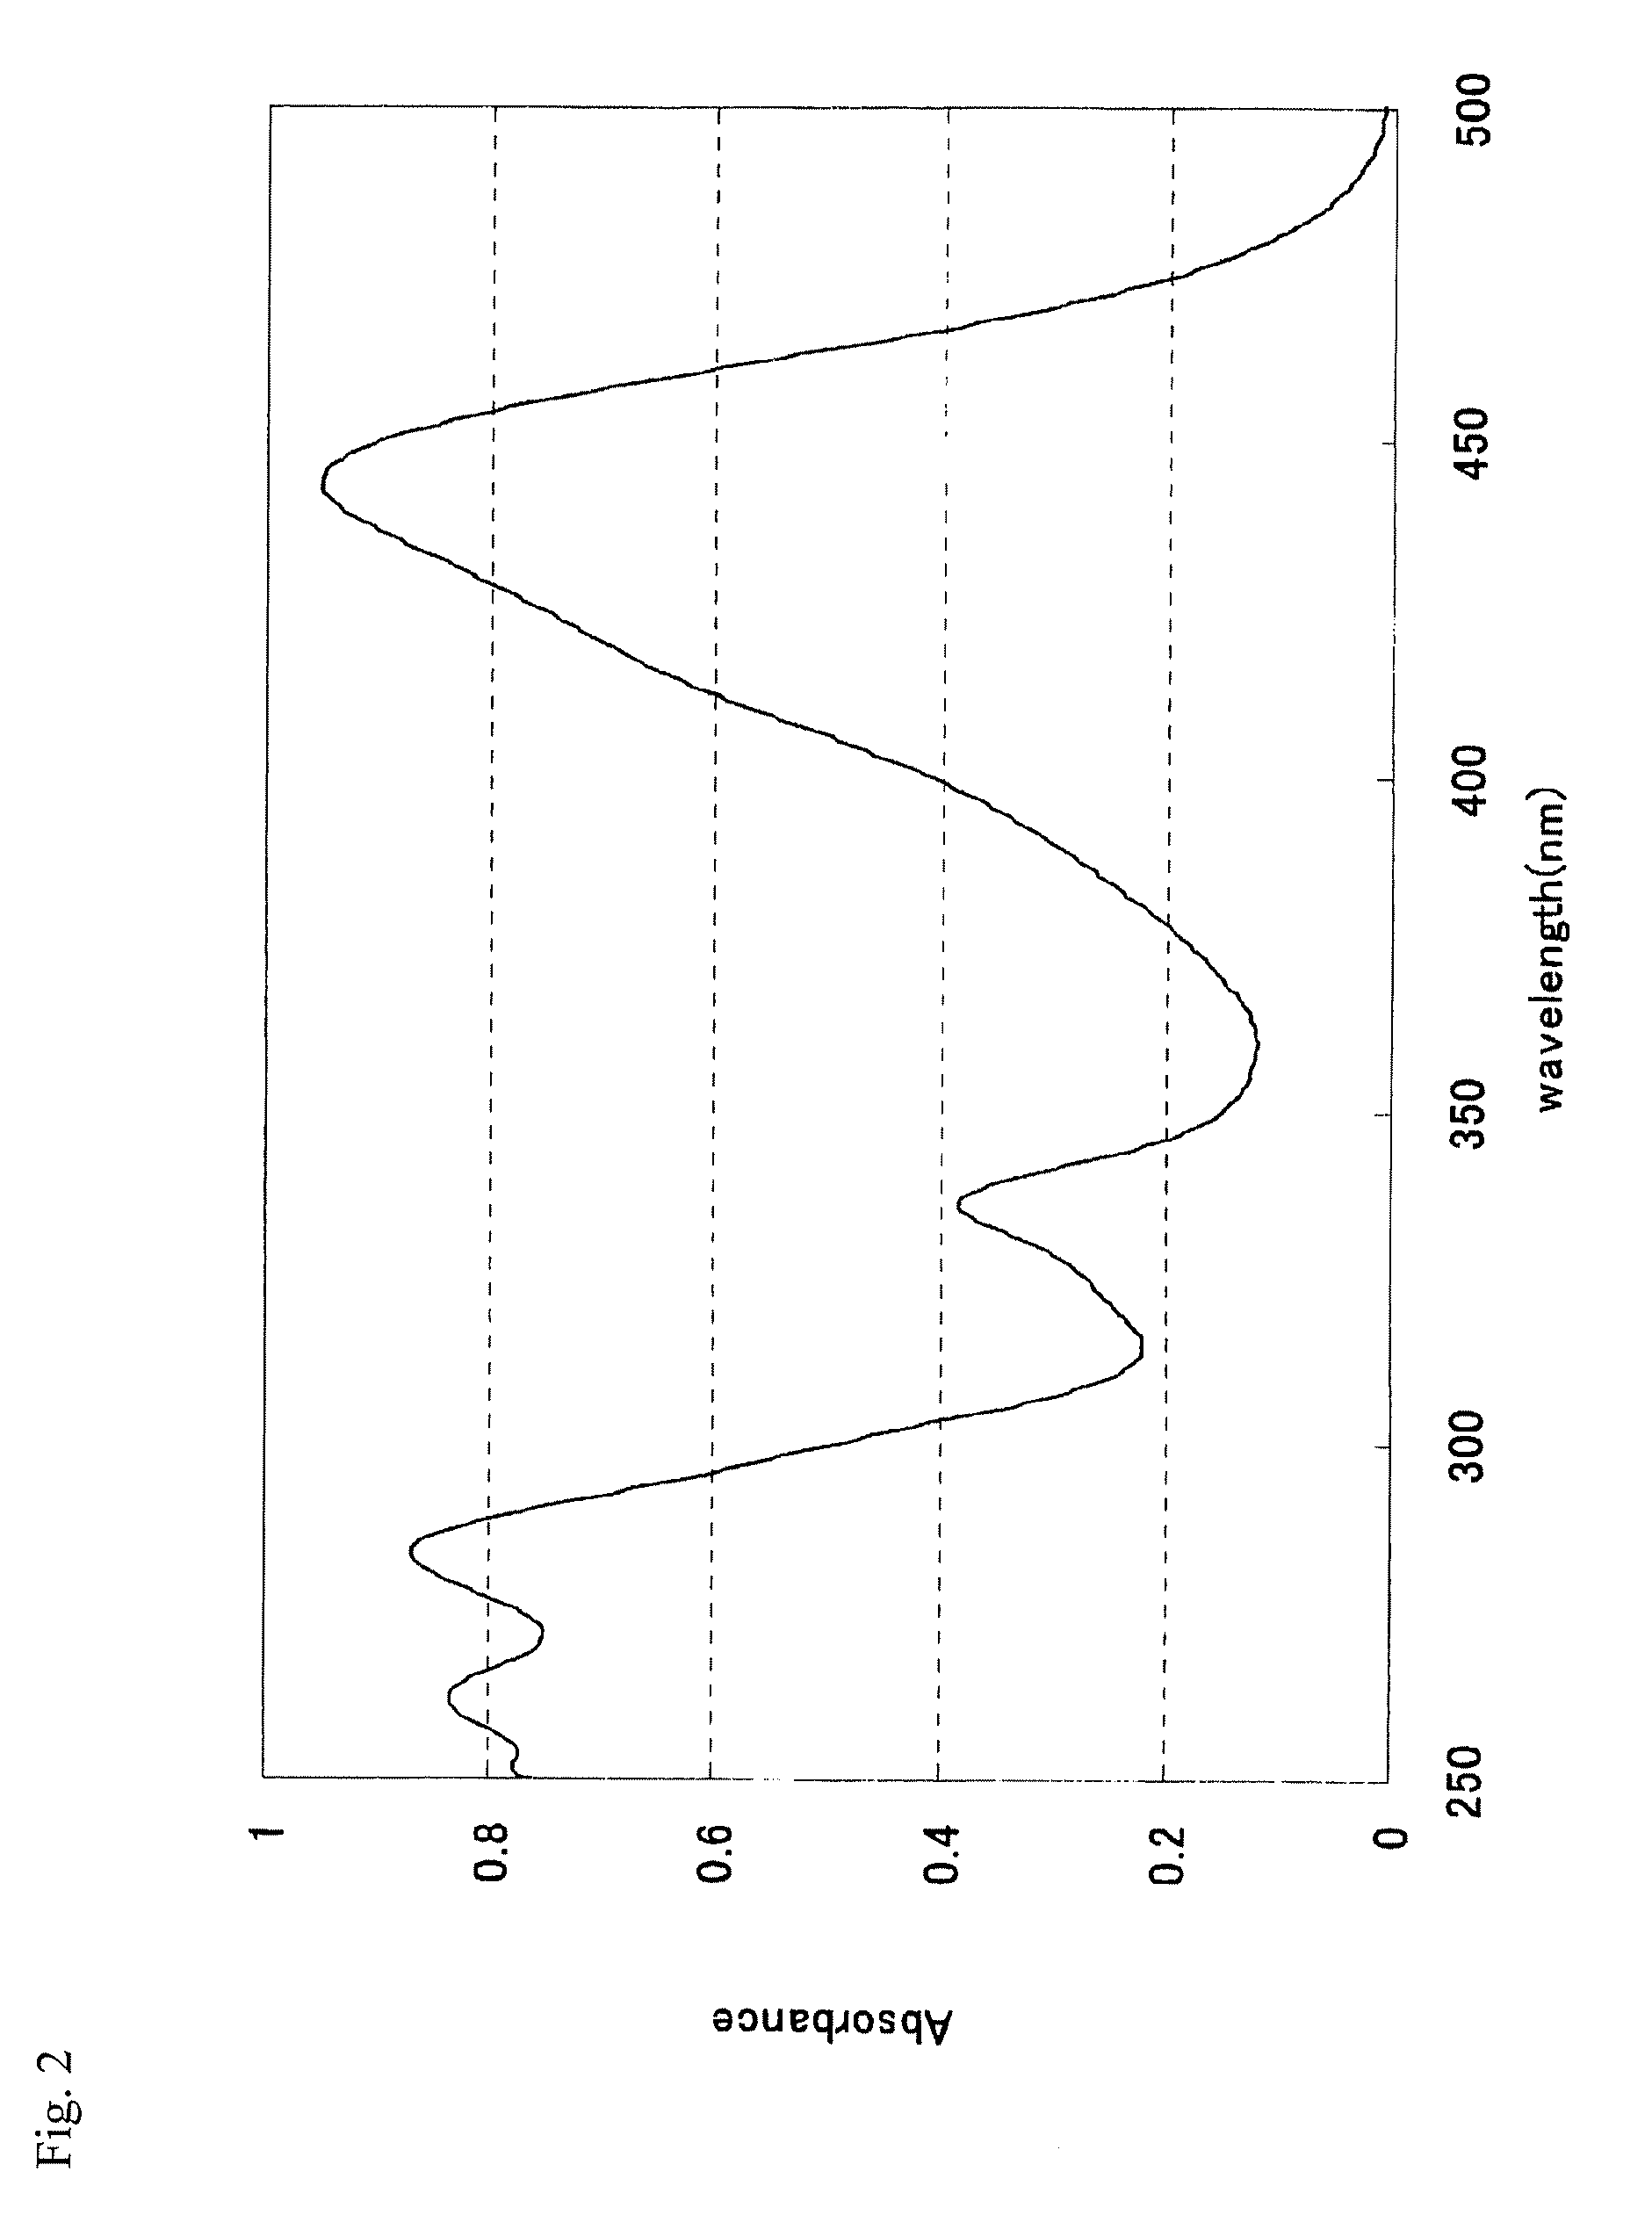 Photosensitive Compositions, Curable Compositions, Novel Compounds, Photopolymerizable Compositions, Color Filters, and Planographic Printing Plate Precursors